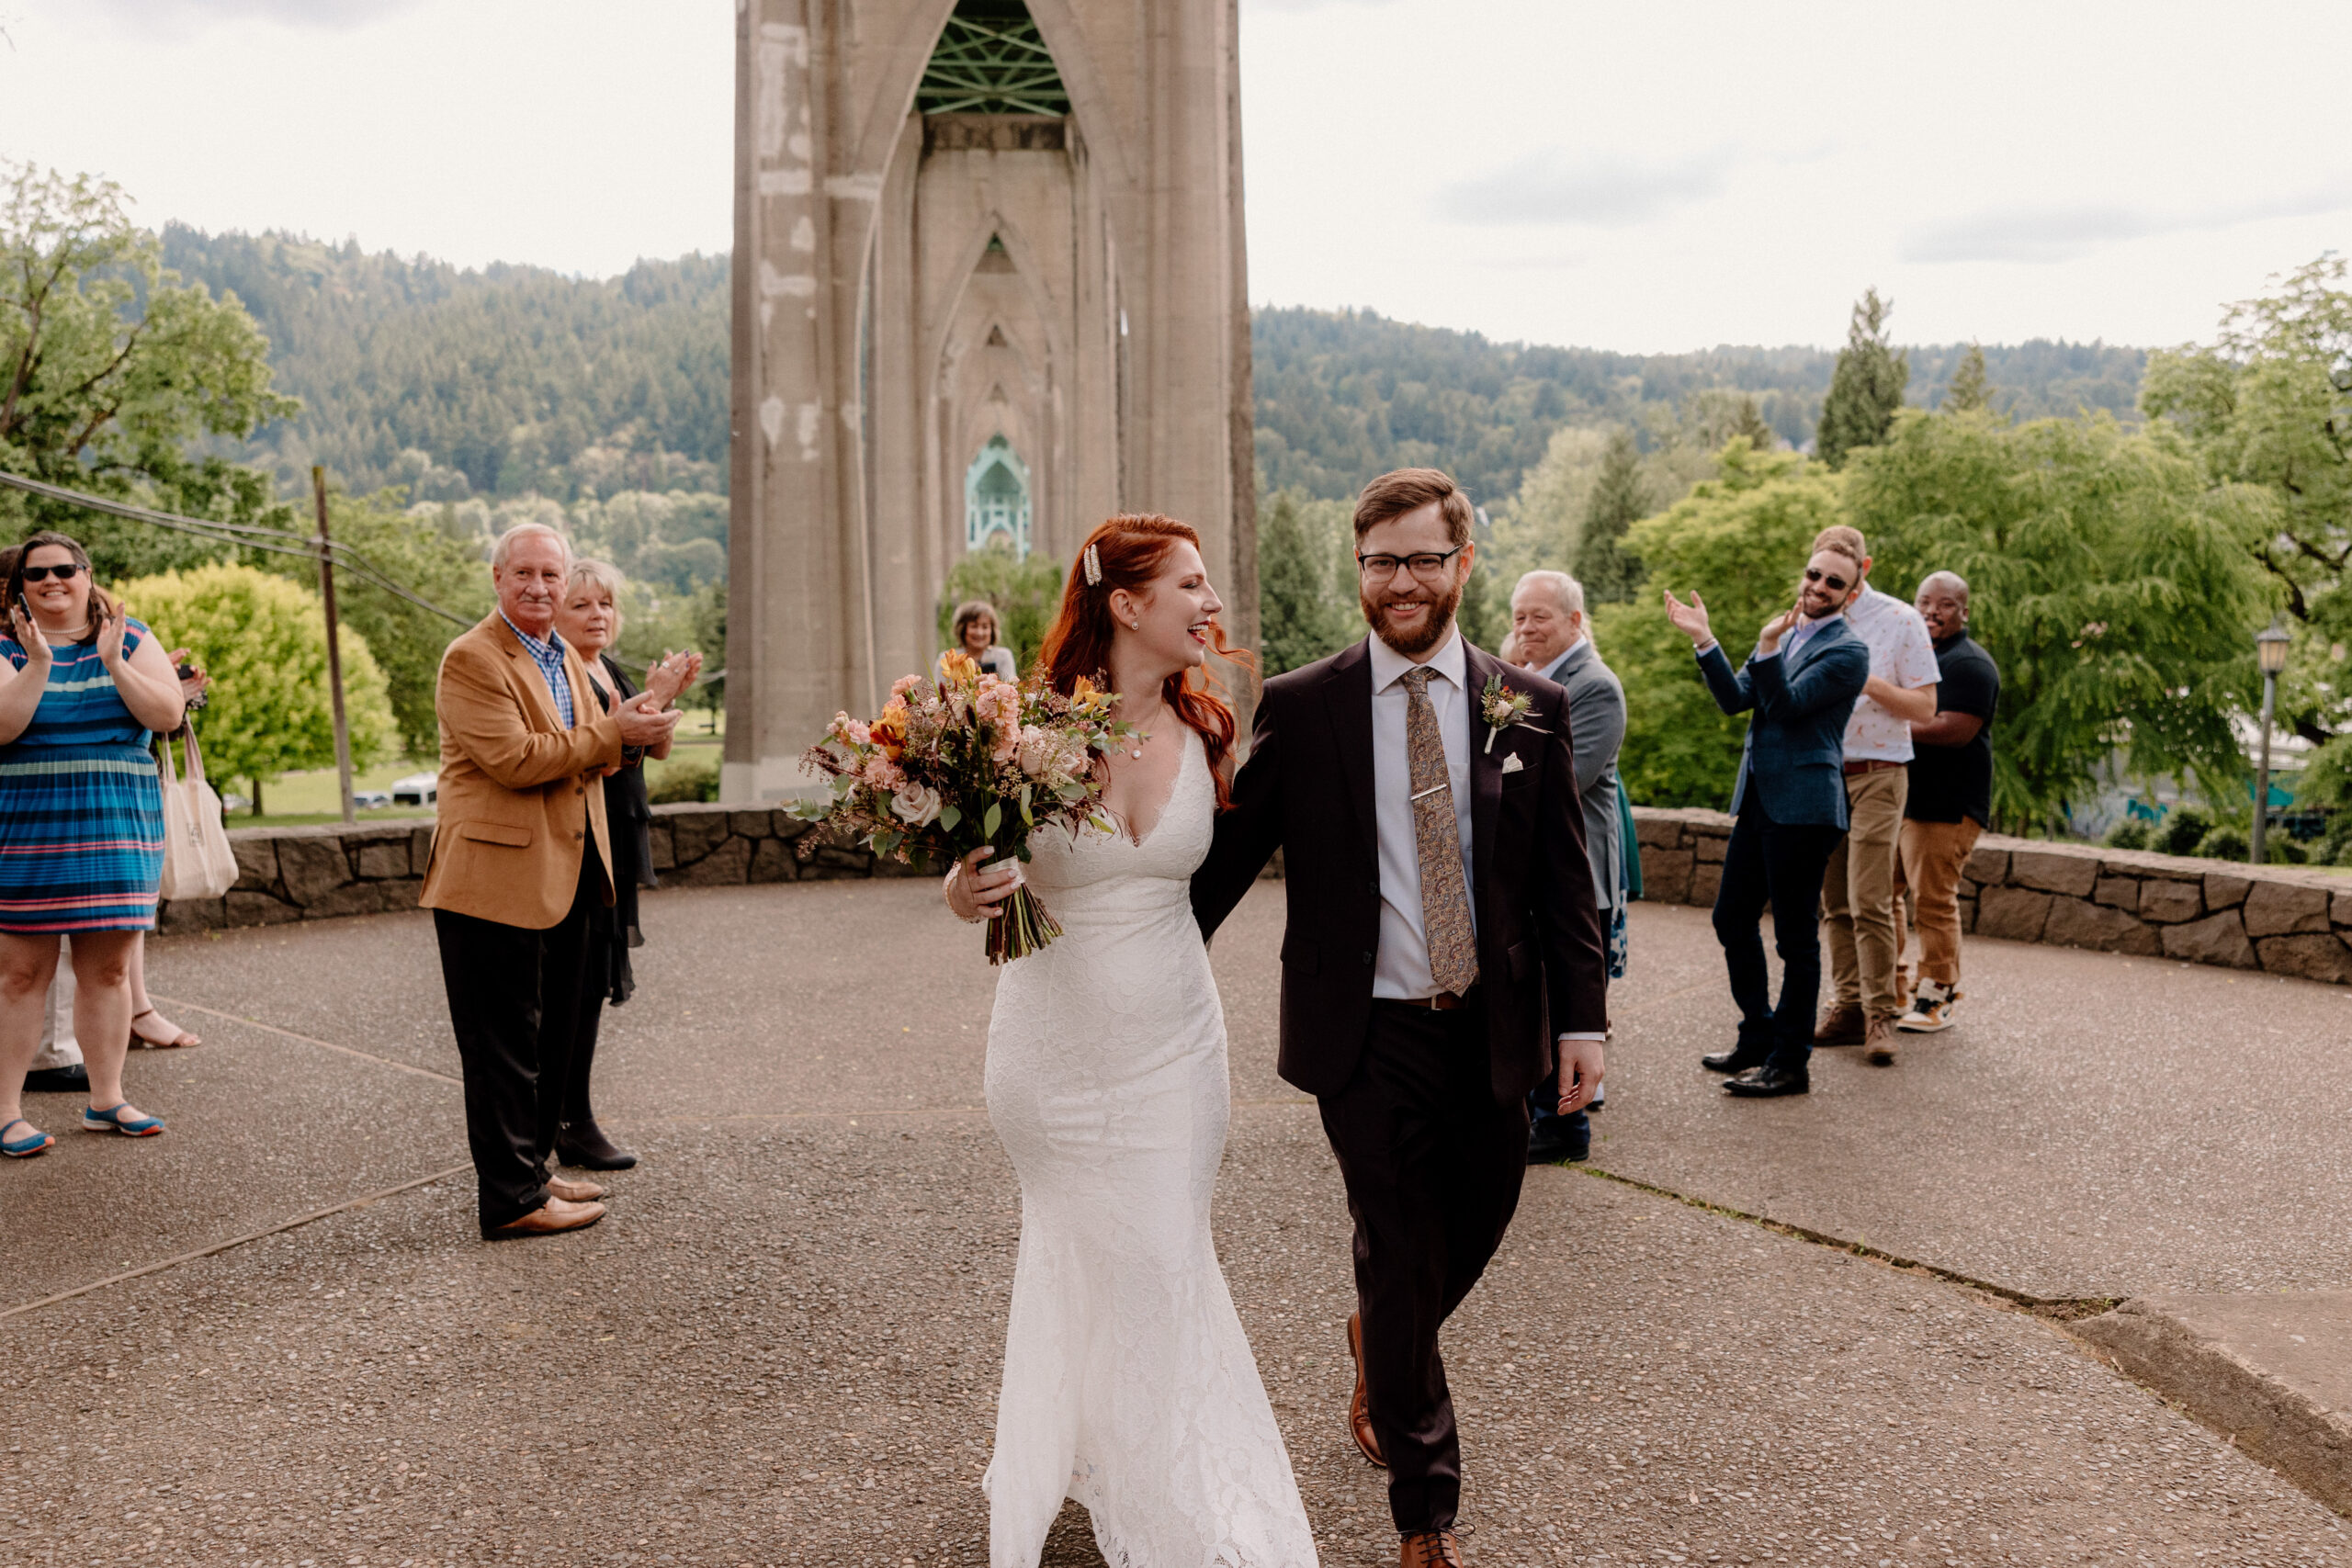 Guests cheering on a happy couple after their Cathedral Park elopement ceremony.